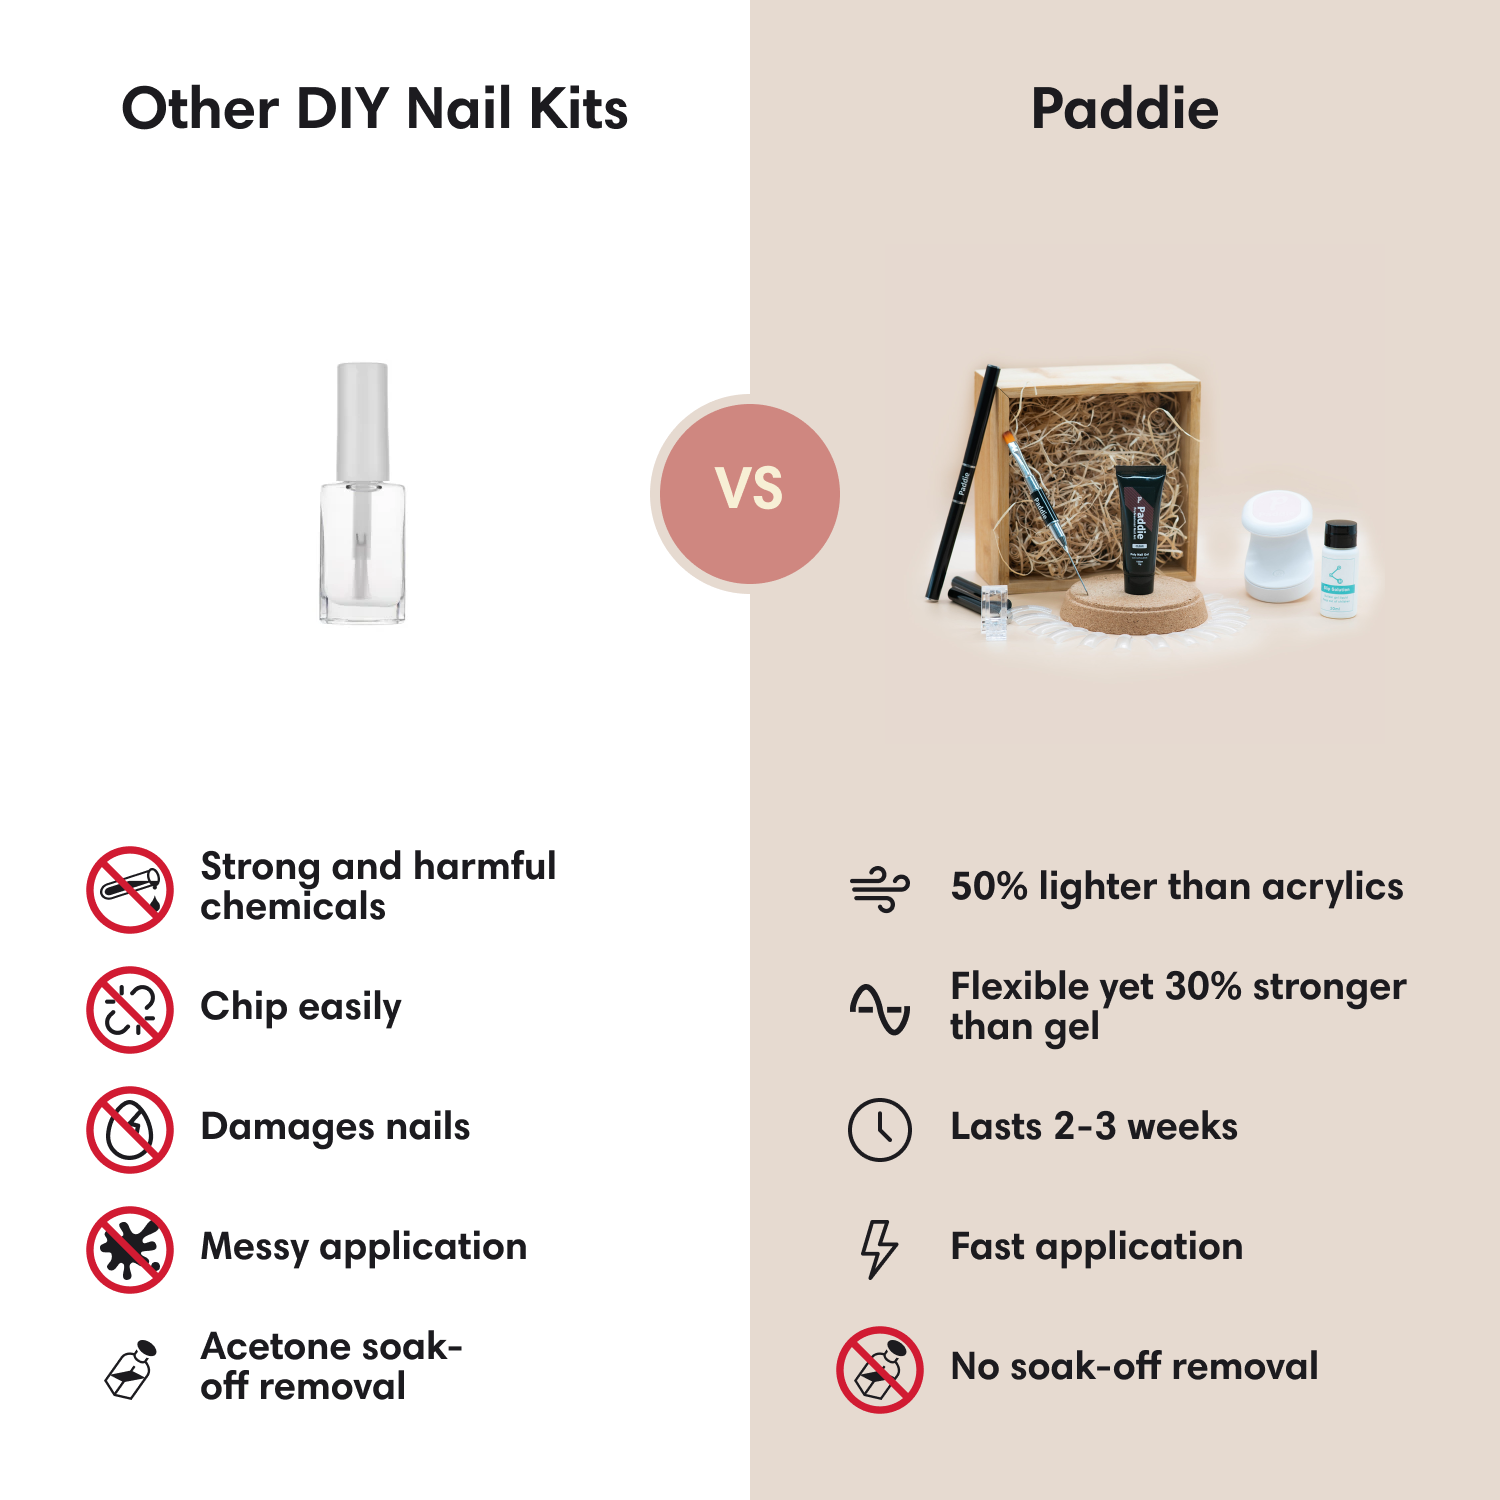 Paddie’s polygel is safer, it’s 50% stronger than acrylics, 70% stronger than gel and does not chip easily. It’s quick and easy to use and lasts up to 3 weeks.